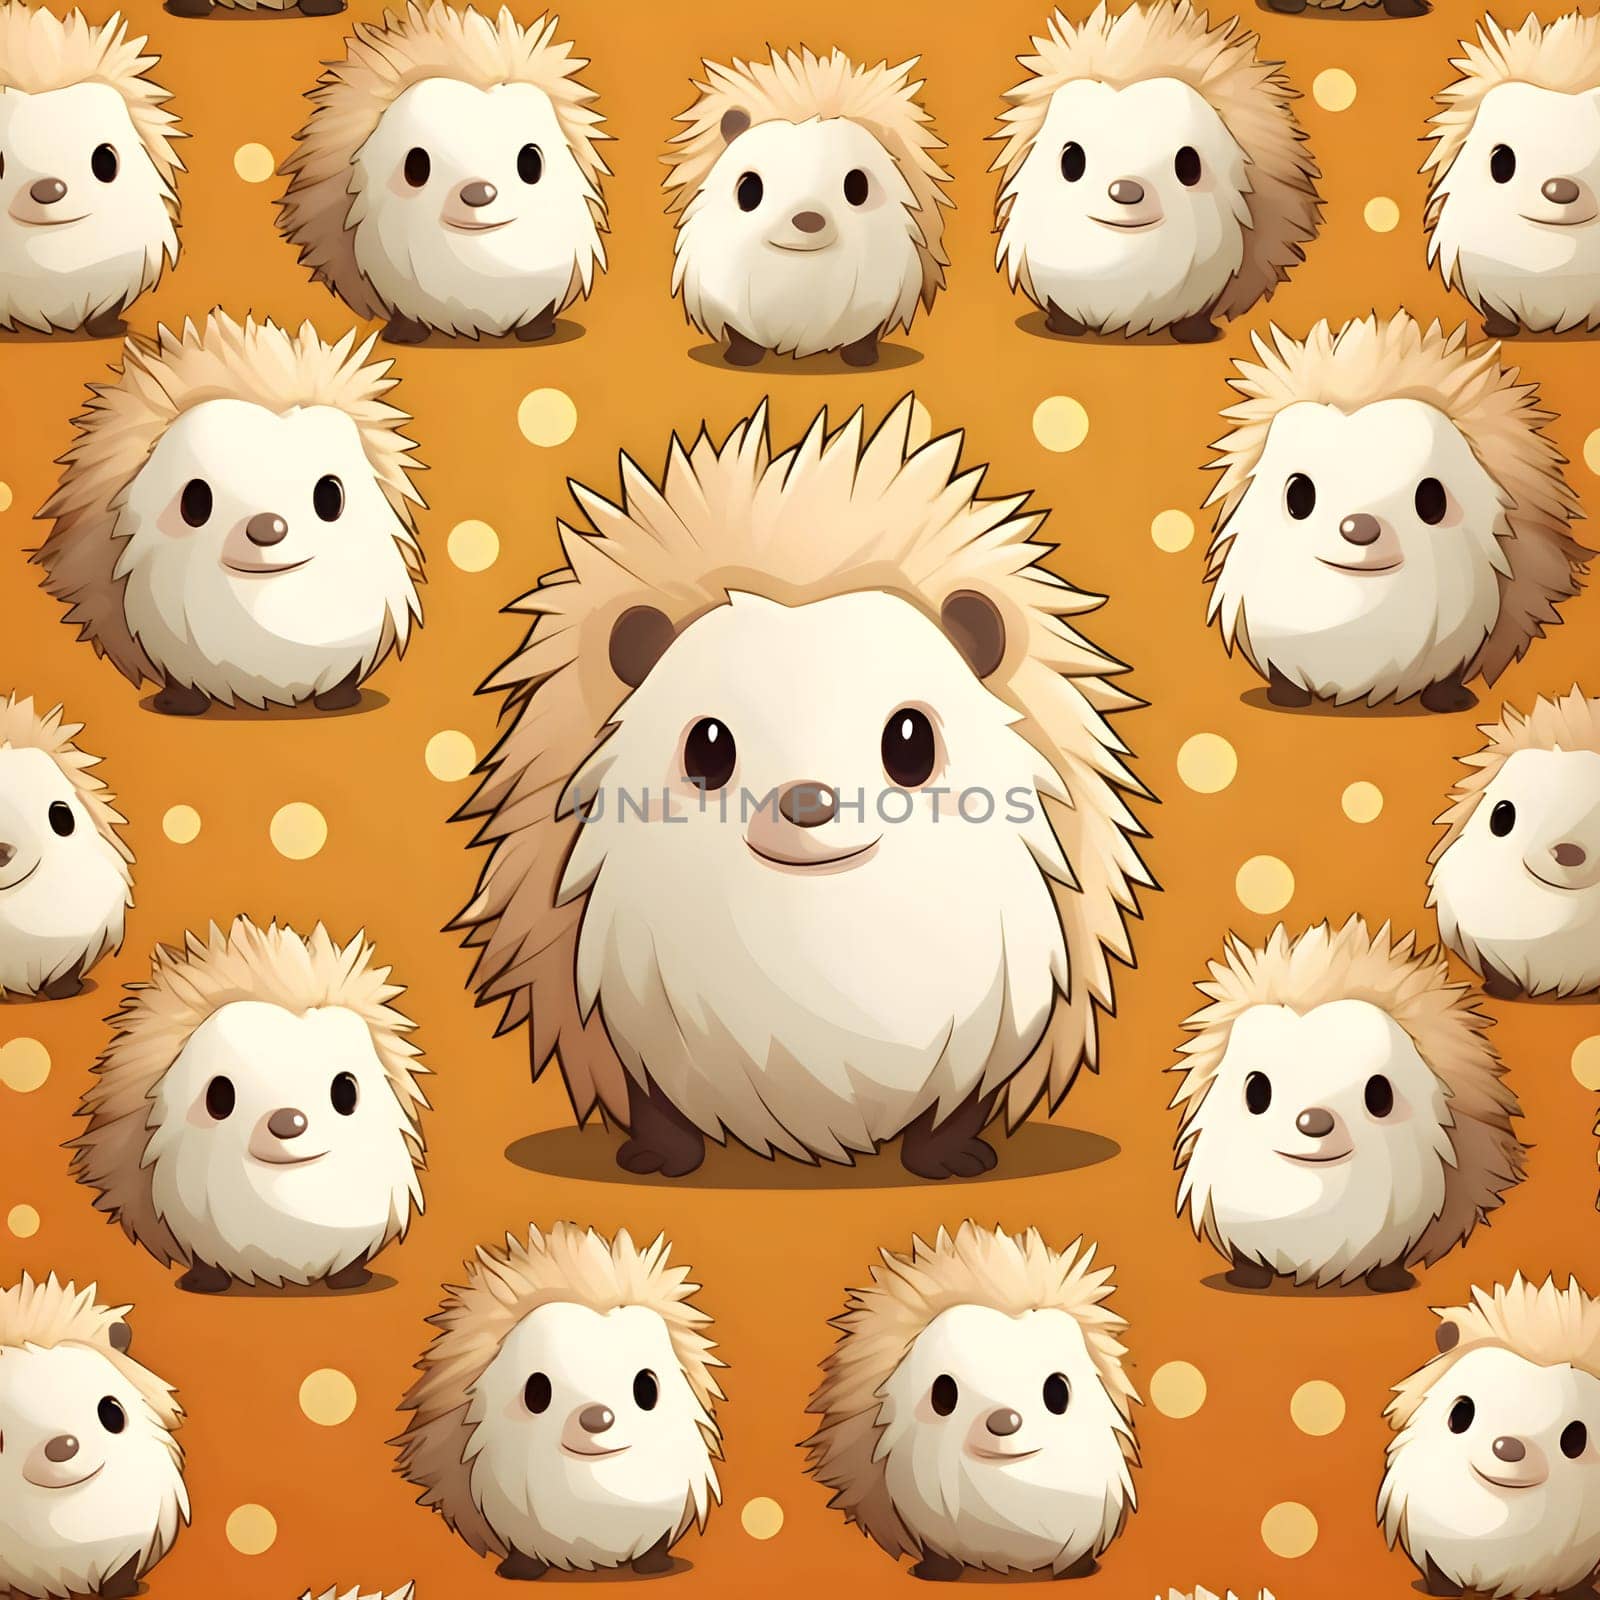 Seamless pattern with cute hedgehogs on orange background illustration by ThemesS